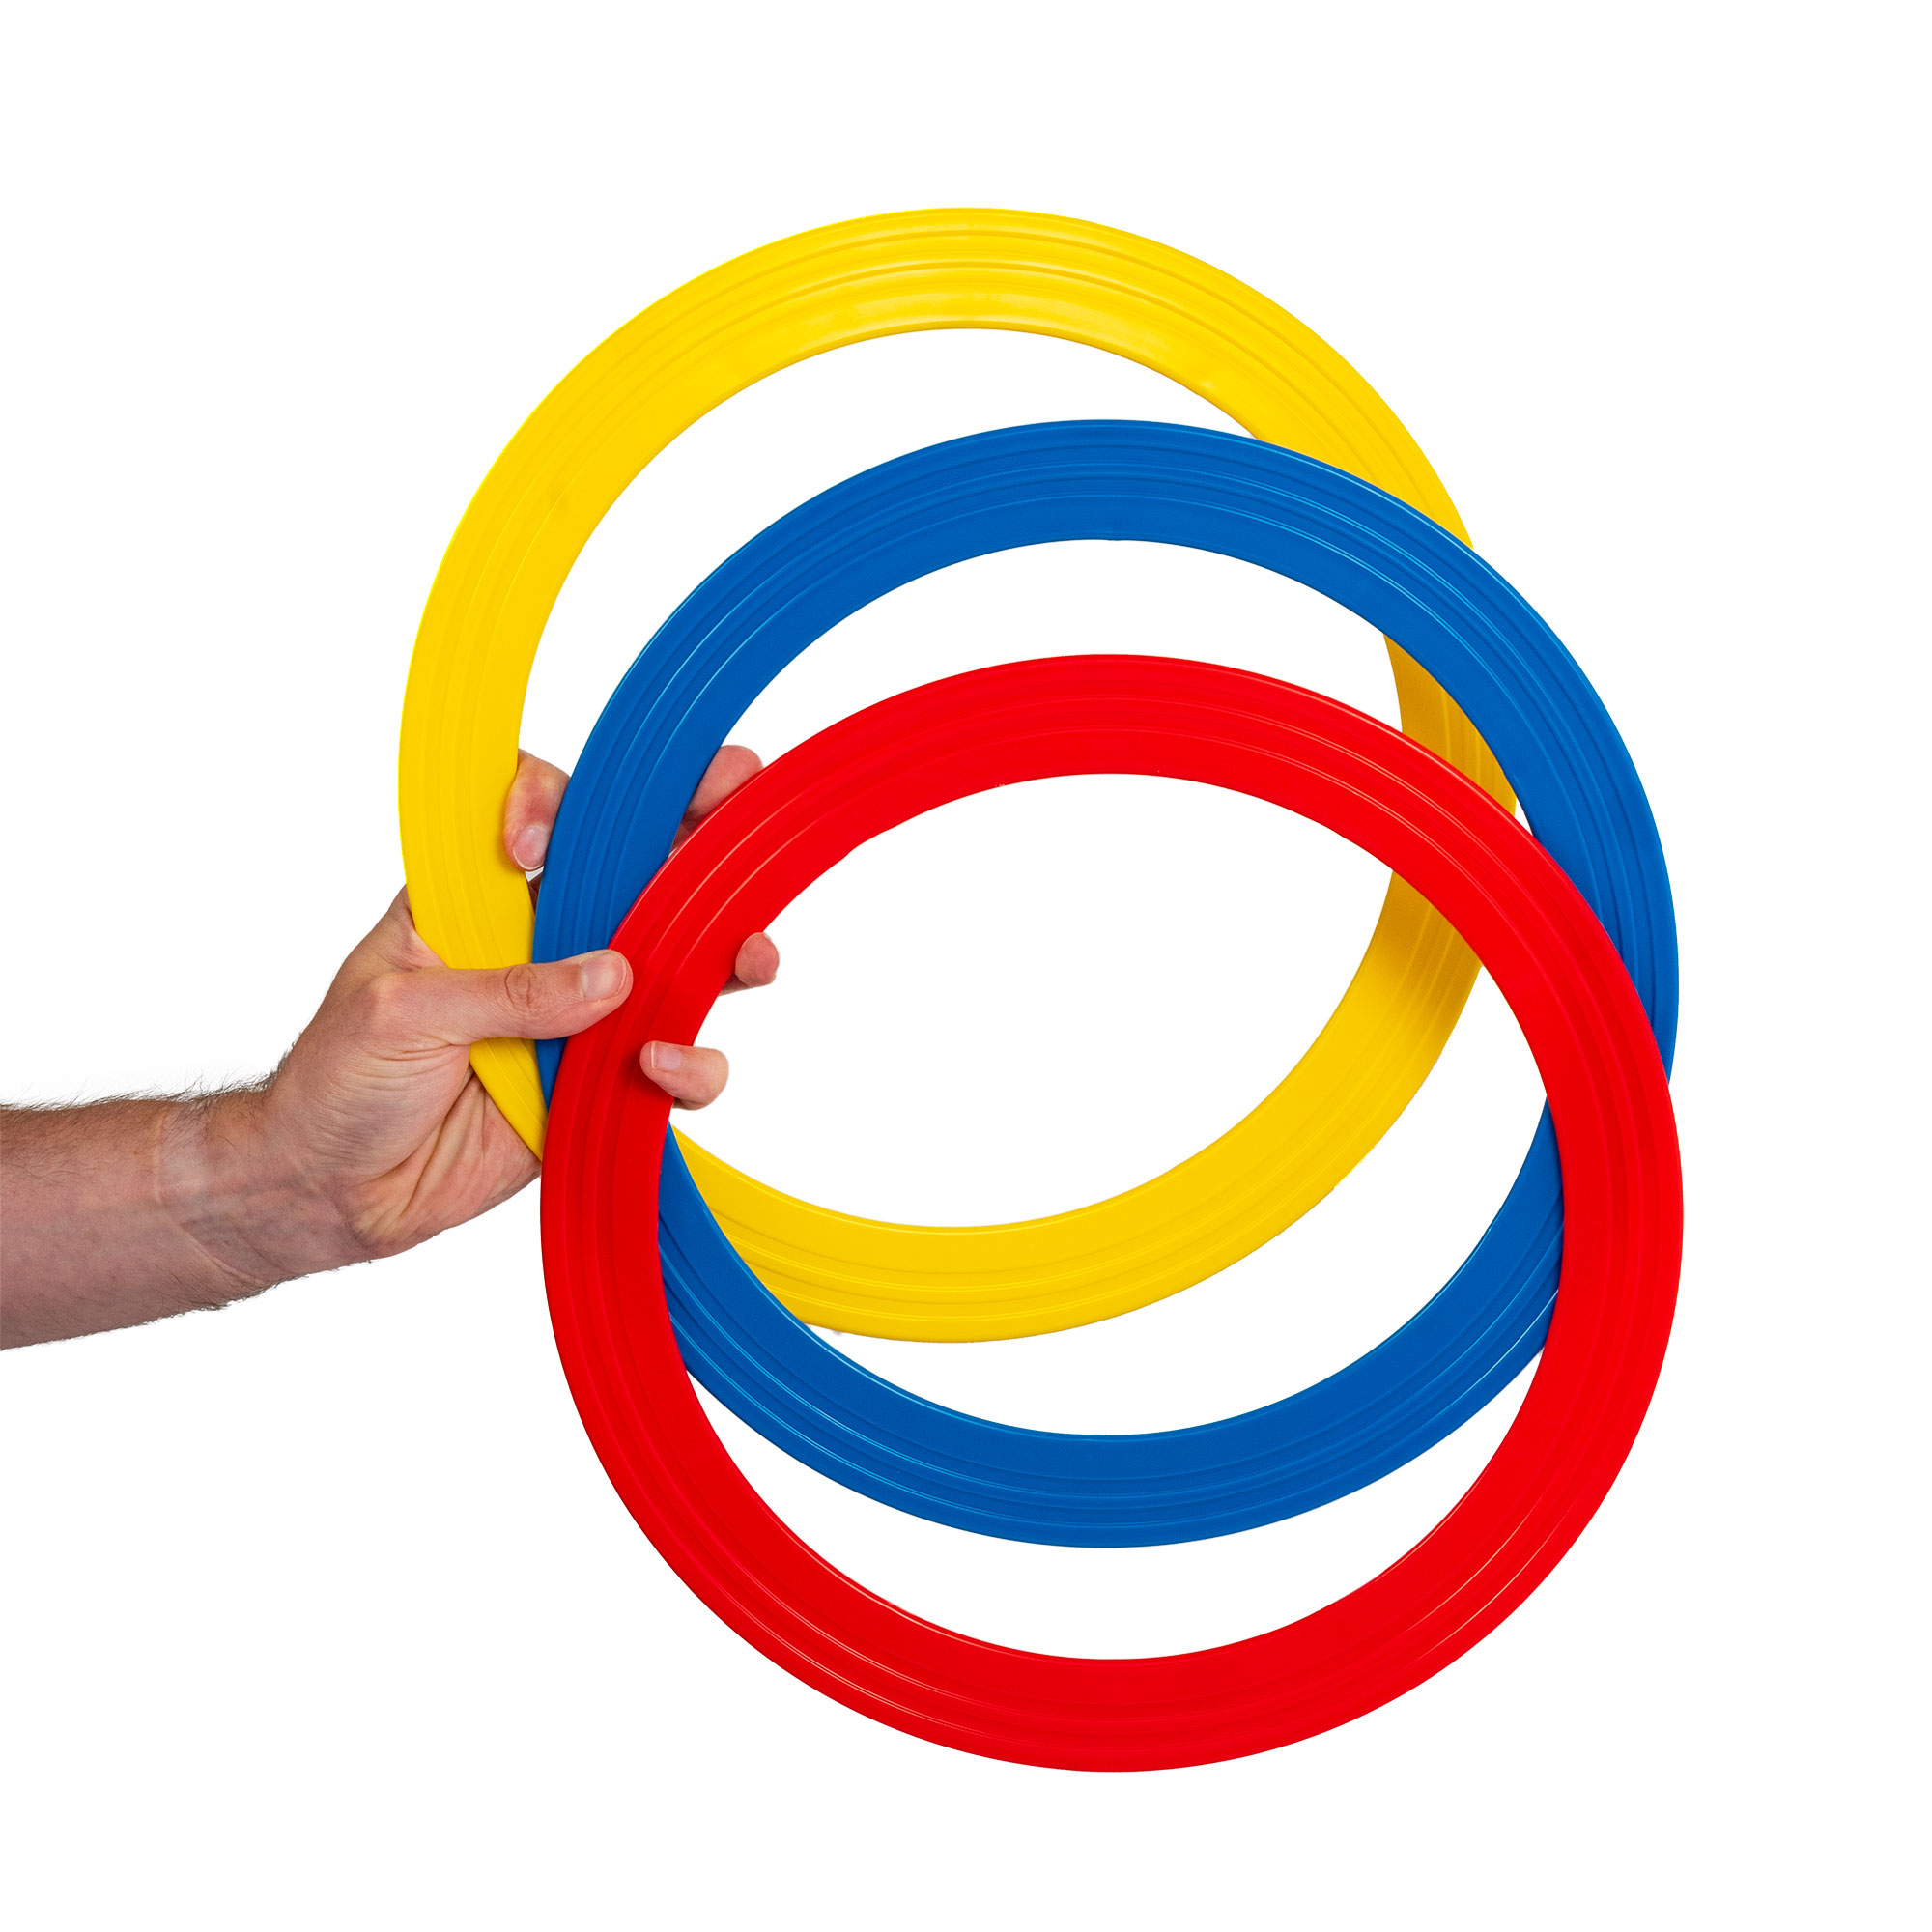 Bag Mr Babache Pro Juggling Ring set of 3 Juggling Rings Small-24cm 